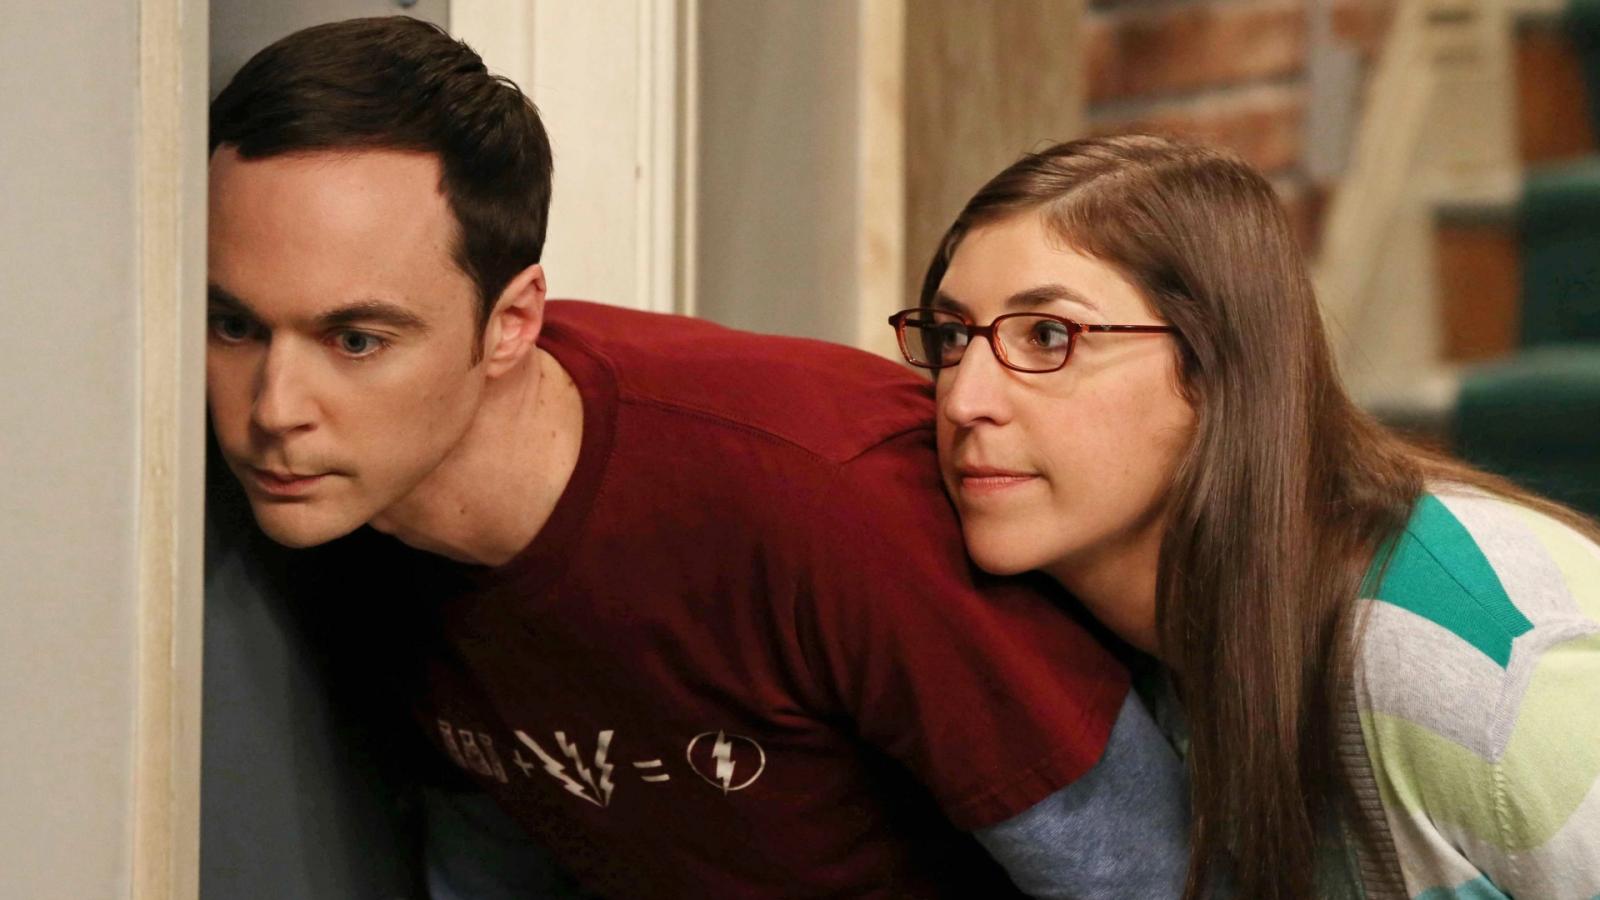 TBBT Character You'd Date, Marry, or Avoid Based on Your Zodiac Sign - image 5